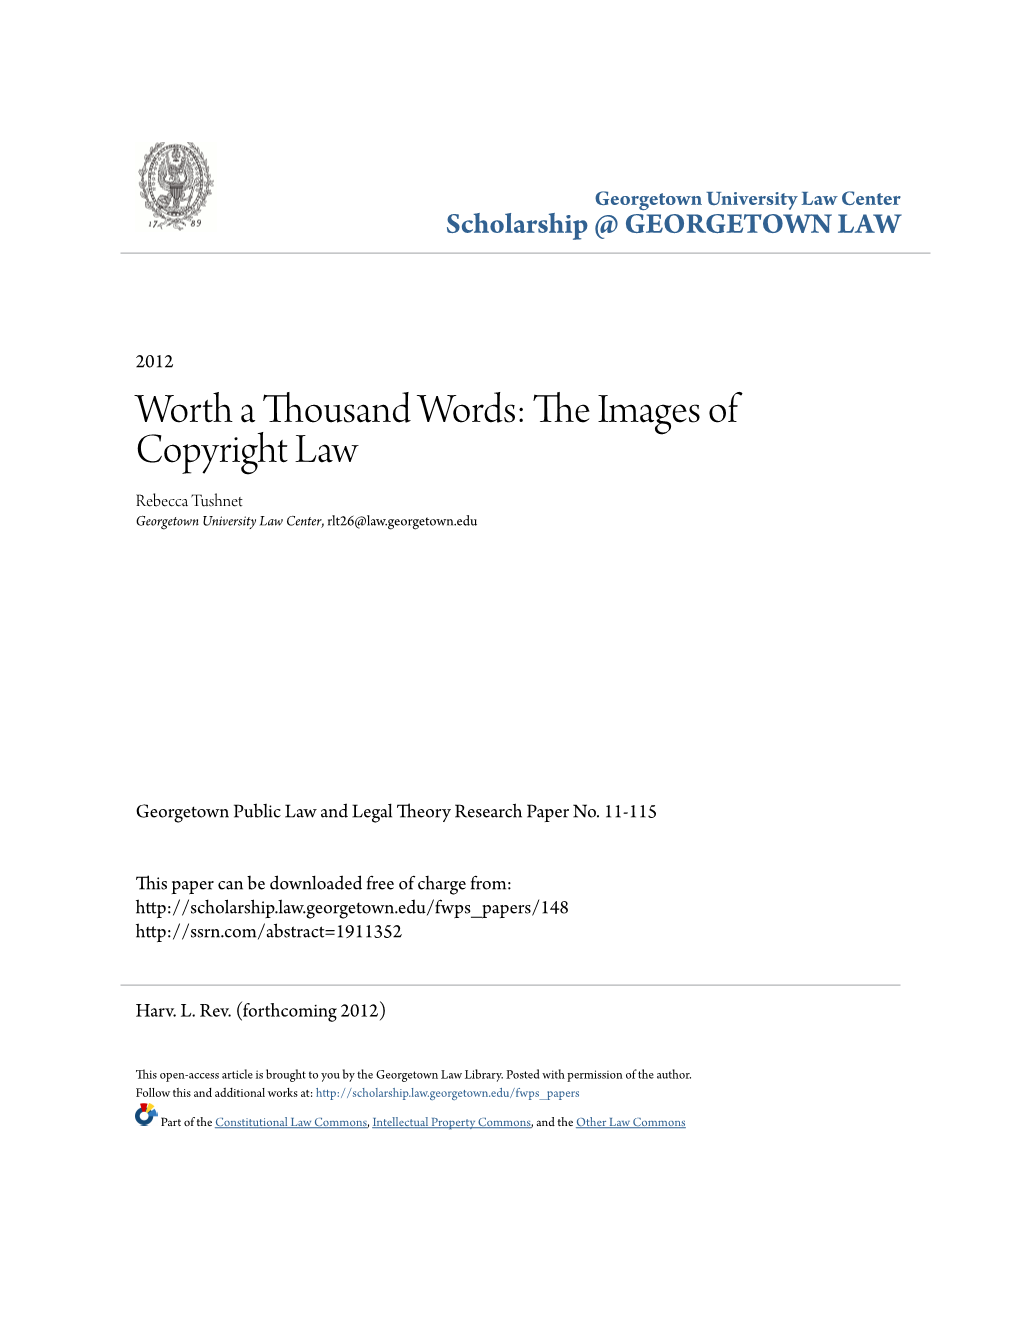 Worth a Thousand Words: the Images of Copyright Law Rebecca Tushnet †